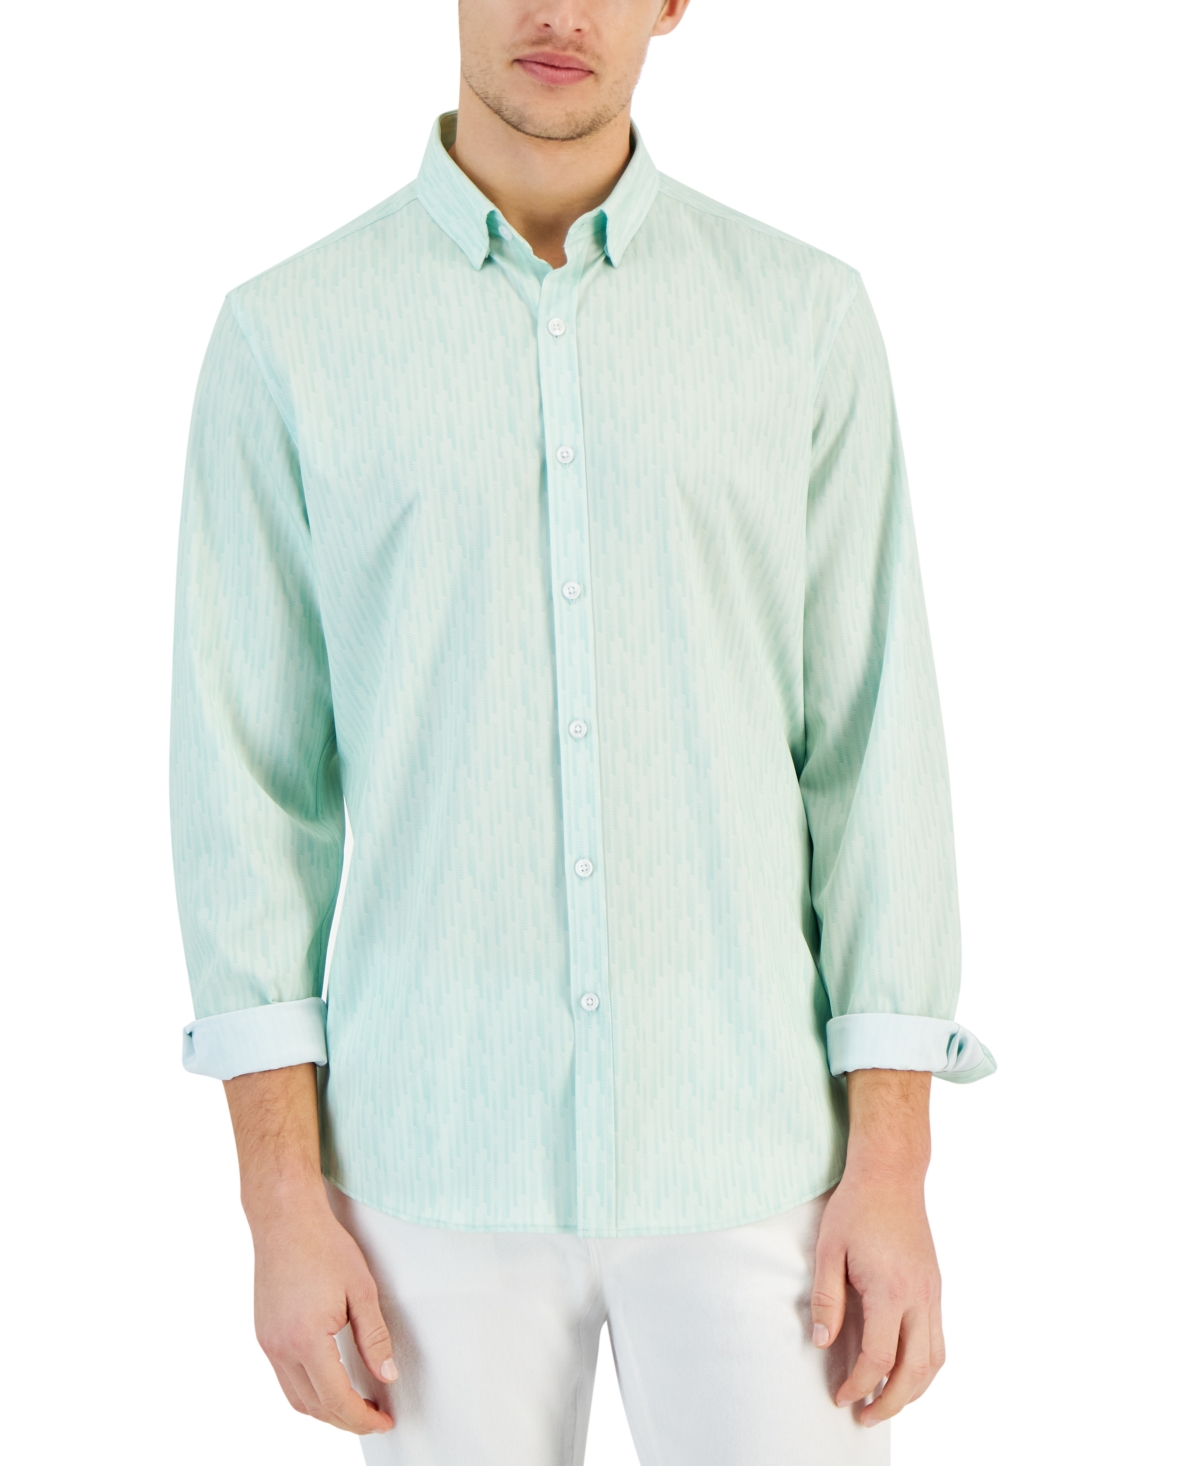 Men's Regular-Fit Stripe Stretch Shirt, Created for Macy's - Green